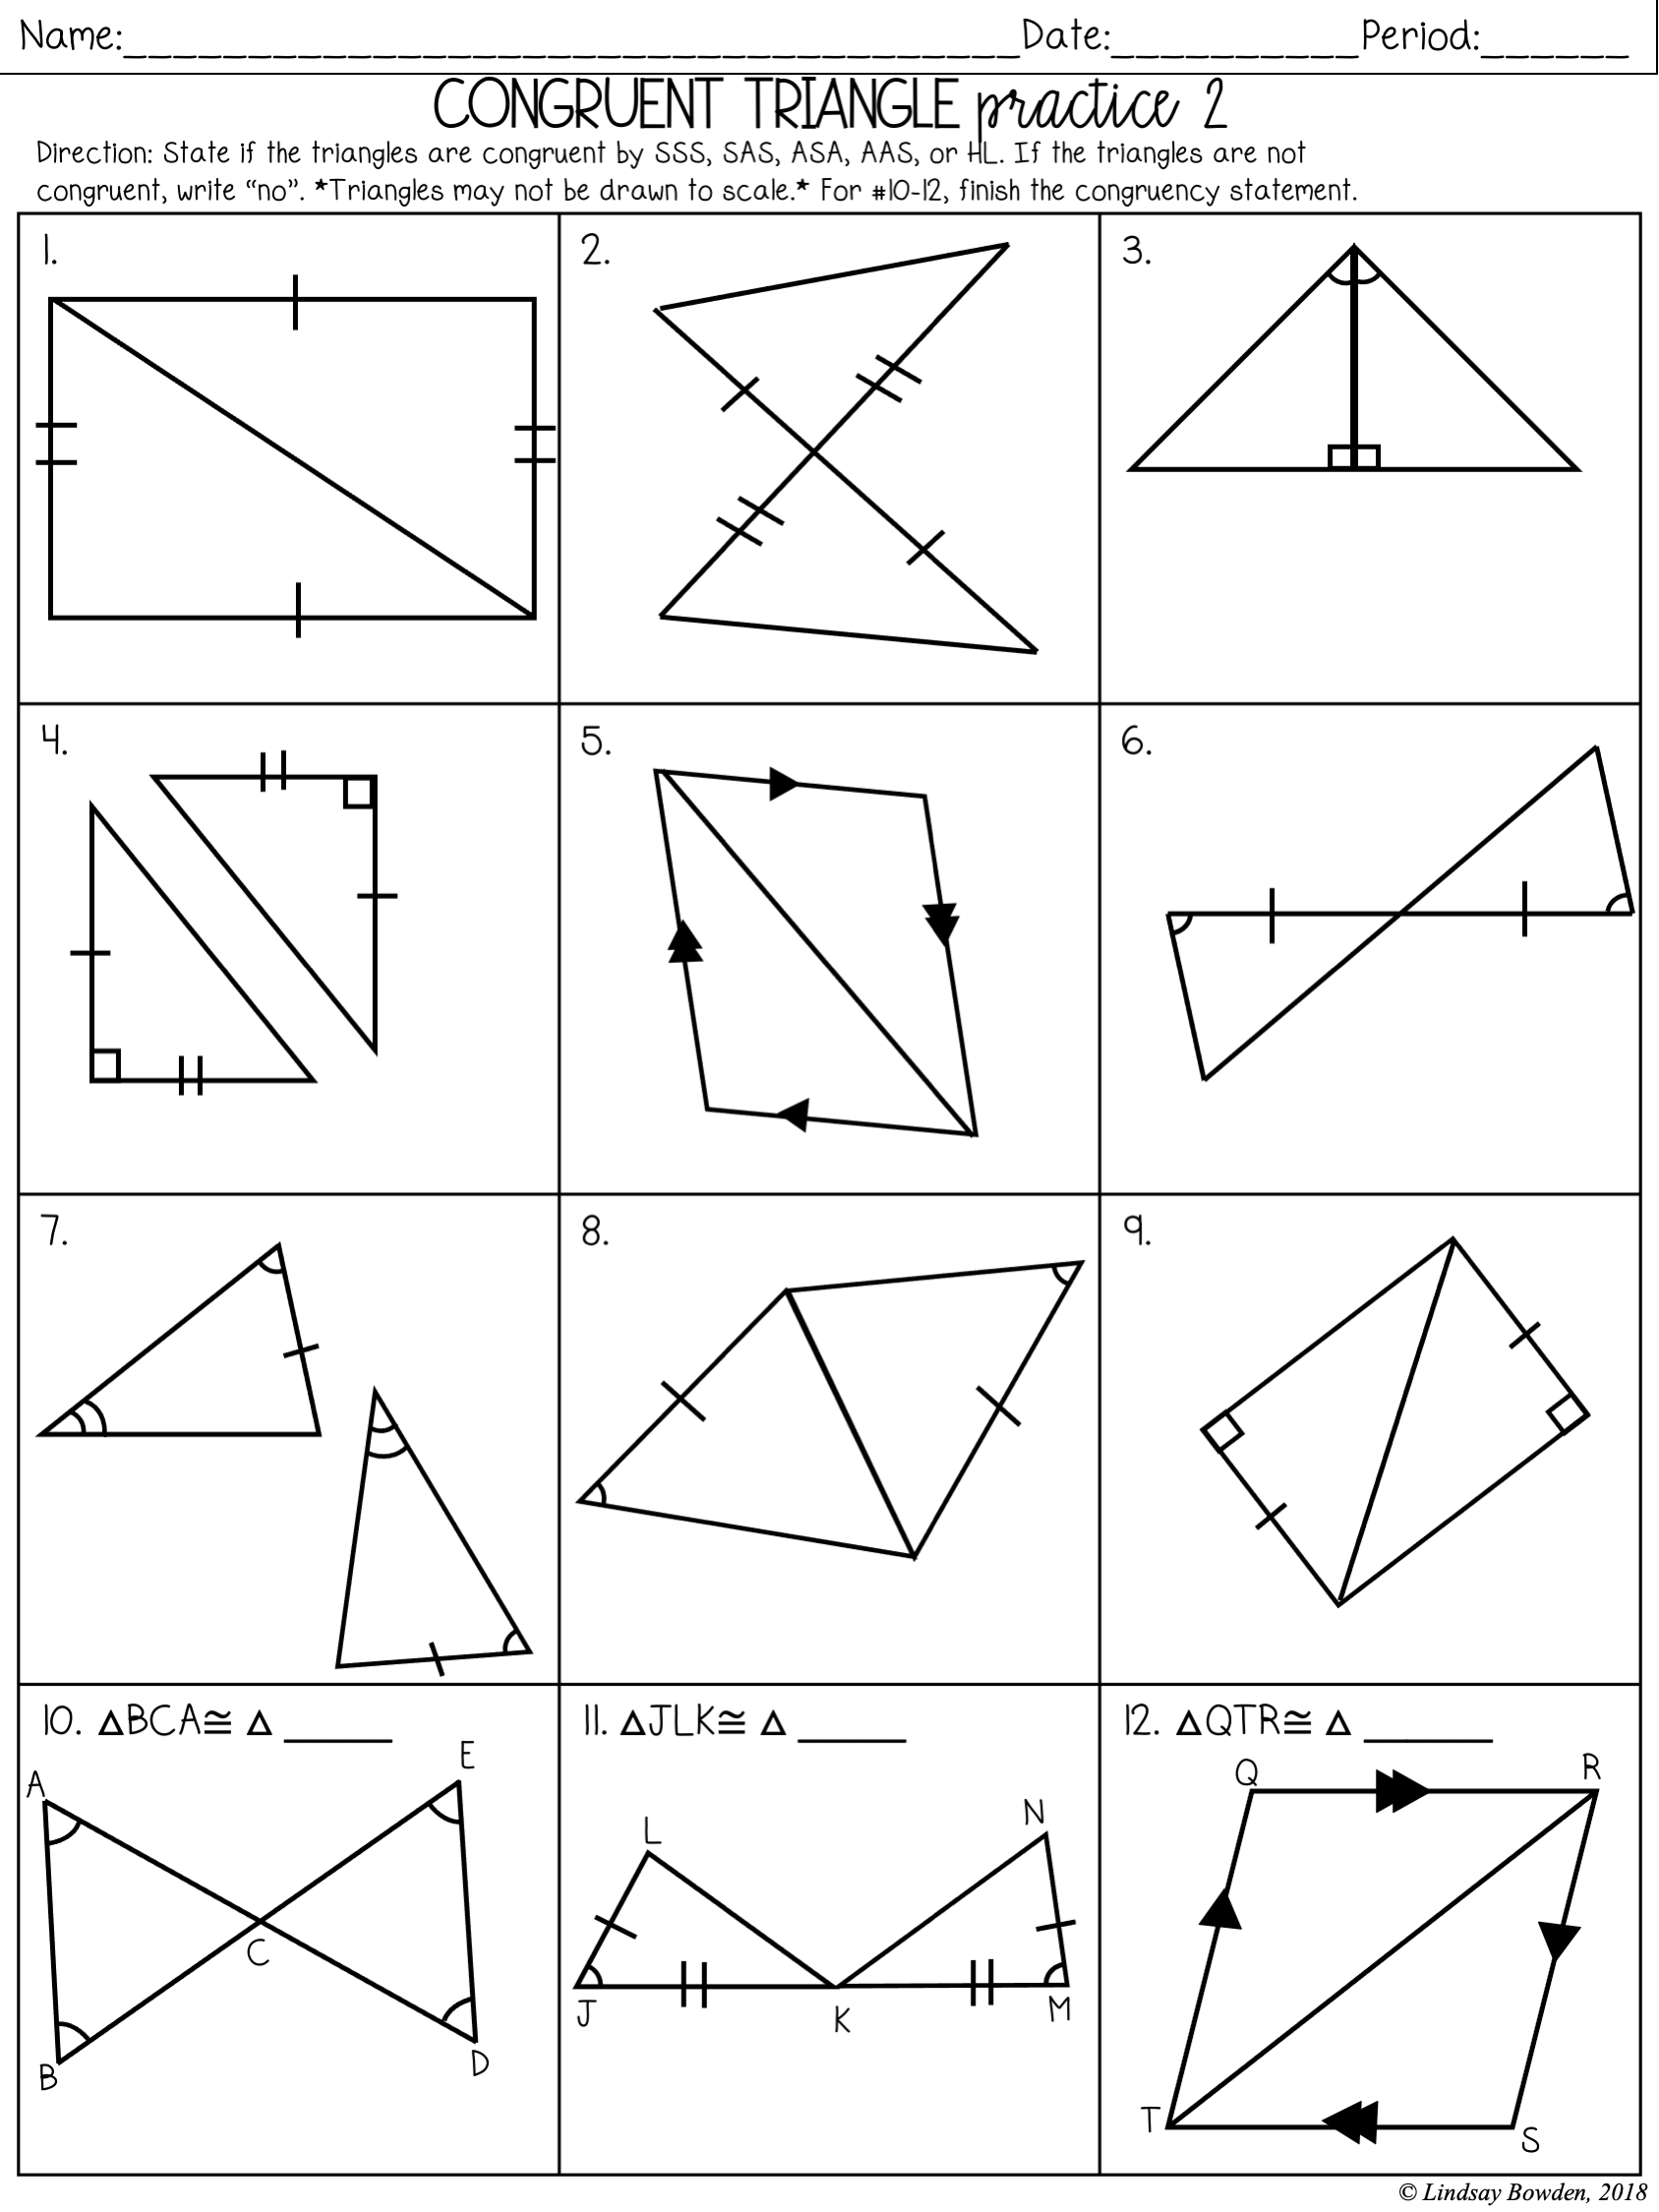 Congruent Triangles Notes and Worksheets - Lindsay Bowden In Geometry Worksheet Congruent Triangles Answers